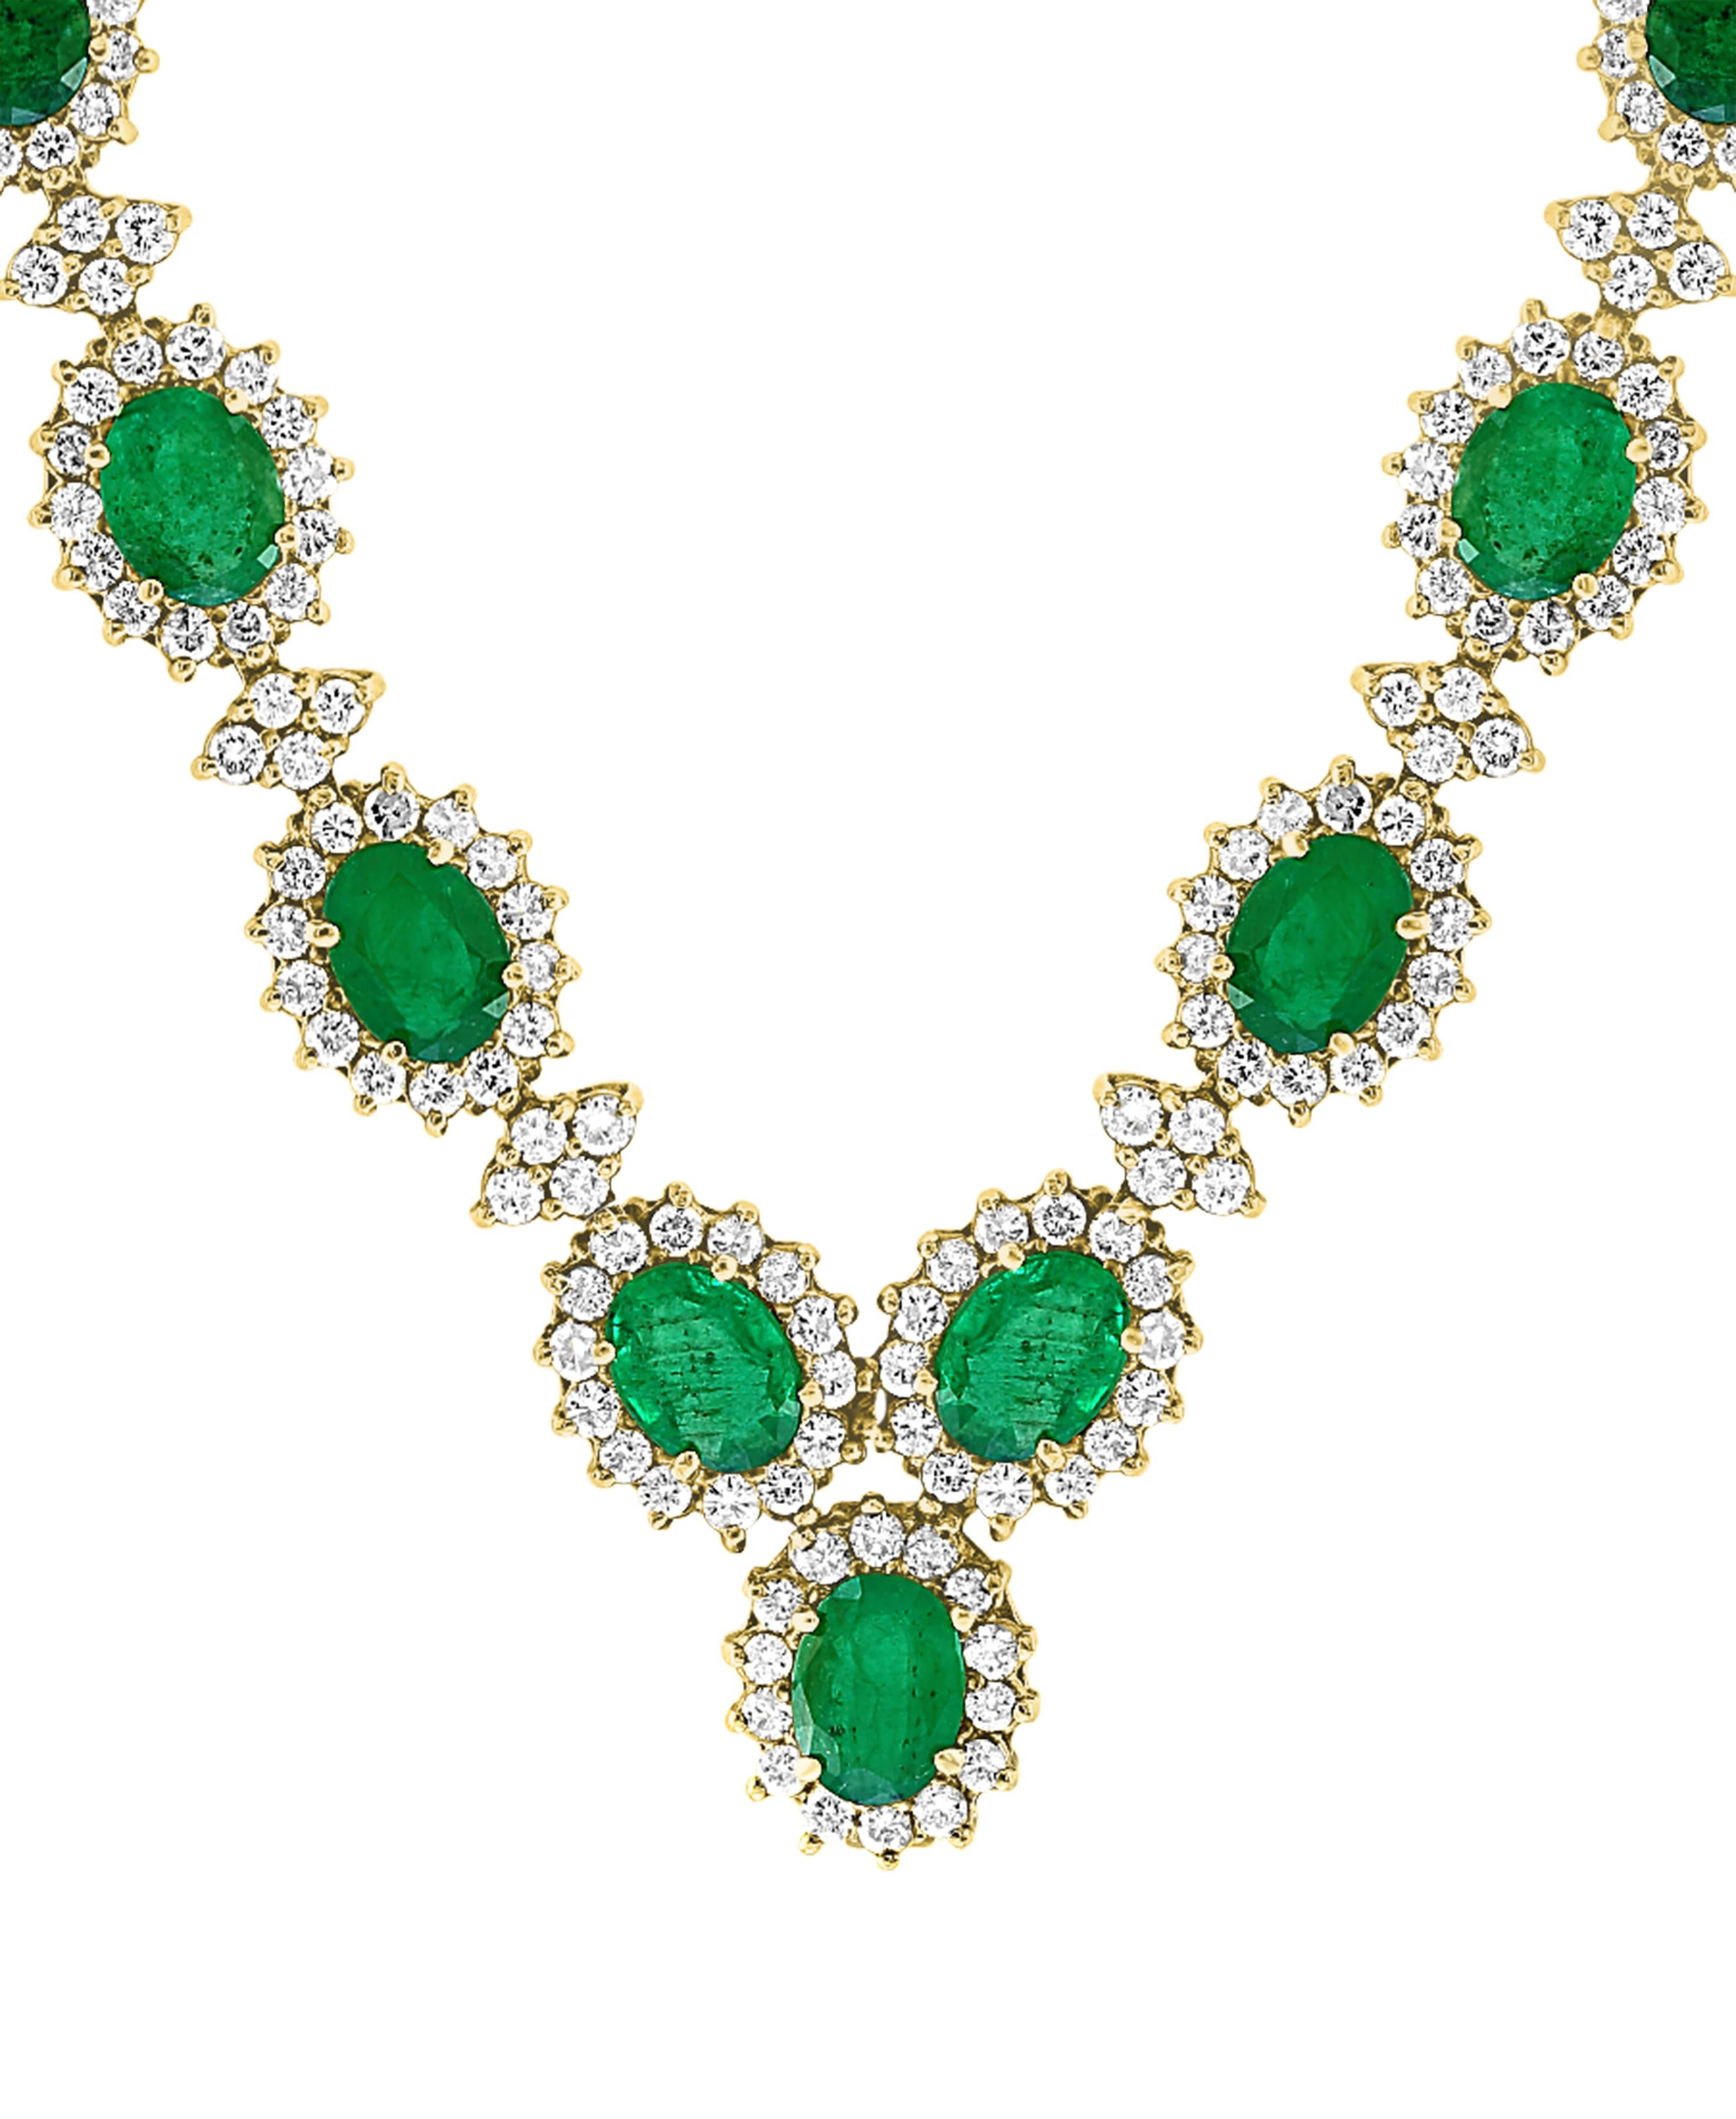 Approximately 37 Ct Oval Shape  Natural Emerald and  Approximately 22 Carats Diamond Necklace and Earring Bridal Suite, Estate
This spectacular Bridal set  consisting of 29 stones of Emerald .Each oval shape emerald  is surrounded by brilliant cut